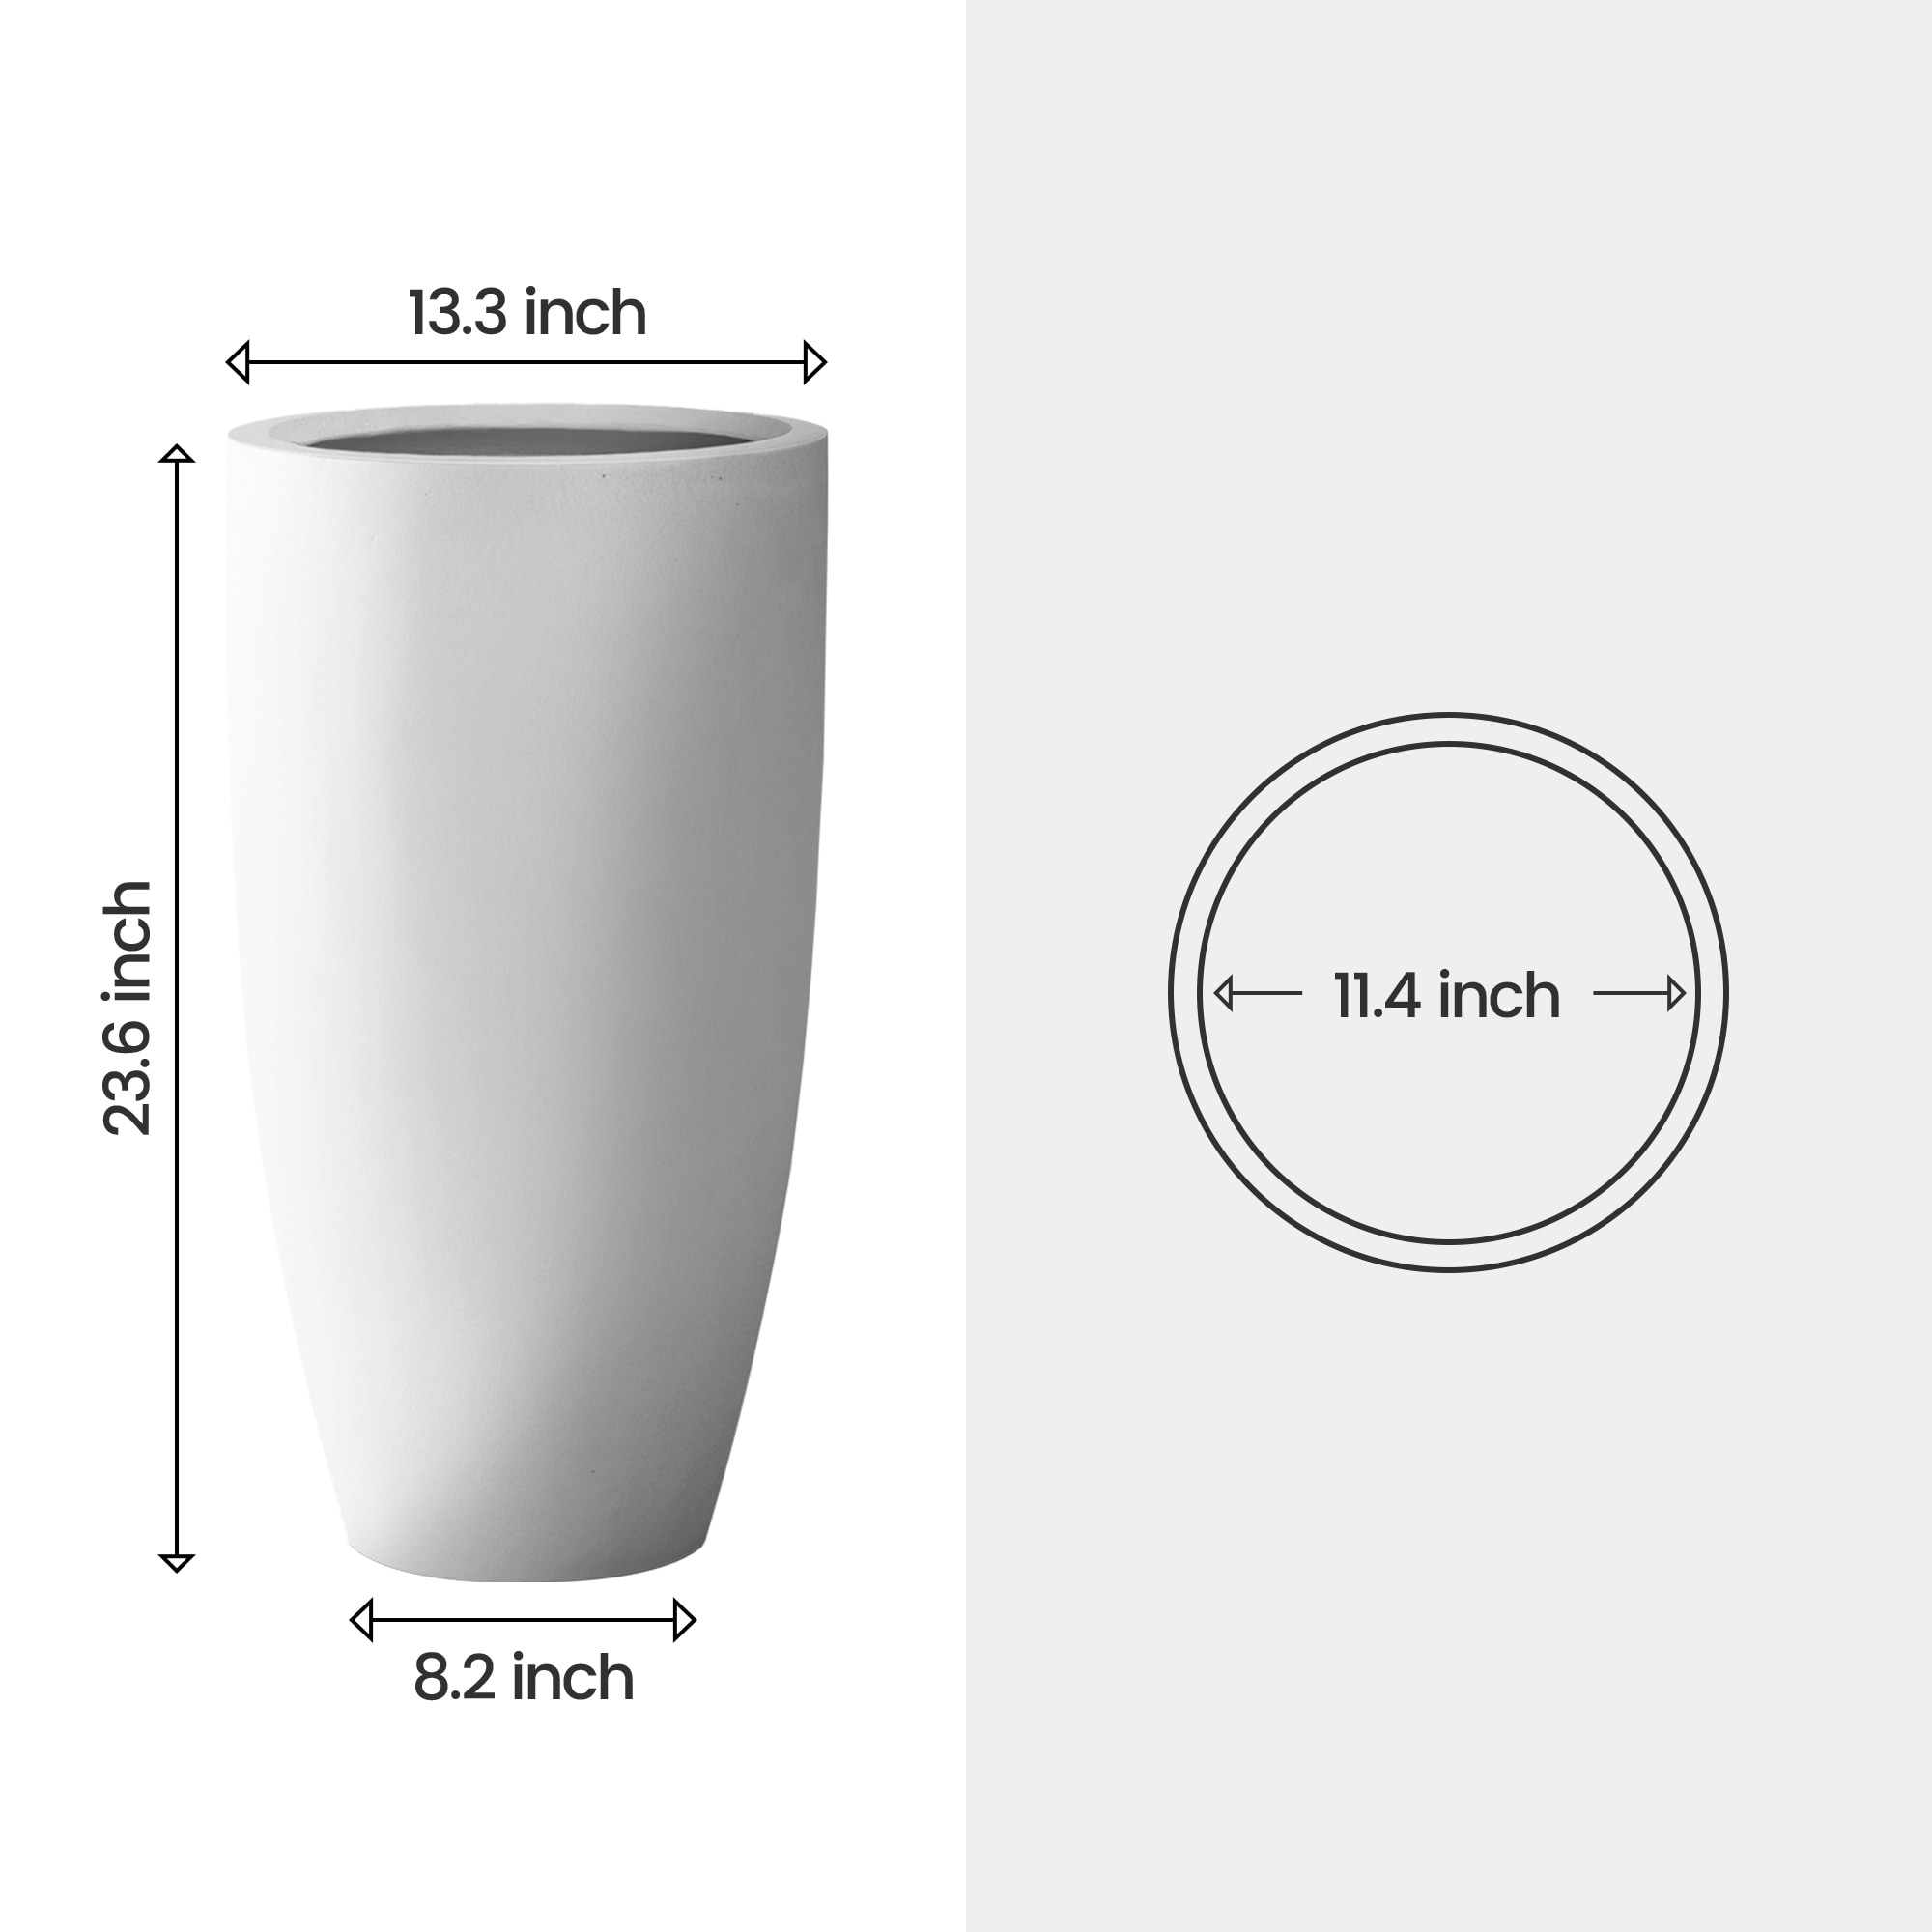 https://ak1.ostkcdn.com/images/products/is/images/direct/6ccdcee3f97431902af772dd4acc8567e6c47772/Plantara-24%22-H-Concrete-Tall-Solid-White-planter%2C-Large-Outdoor-Plant-pot%2C-Modern-Tapered-Flower-pot-for-Garden.jpg